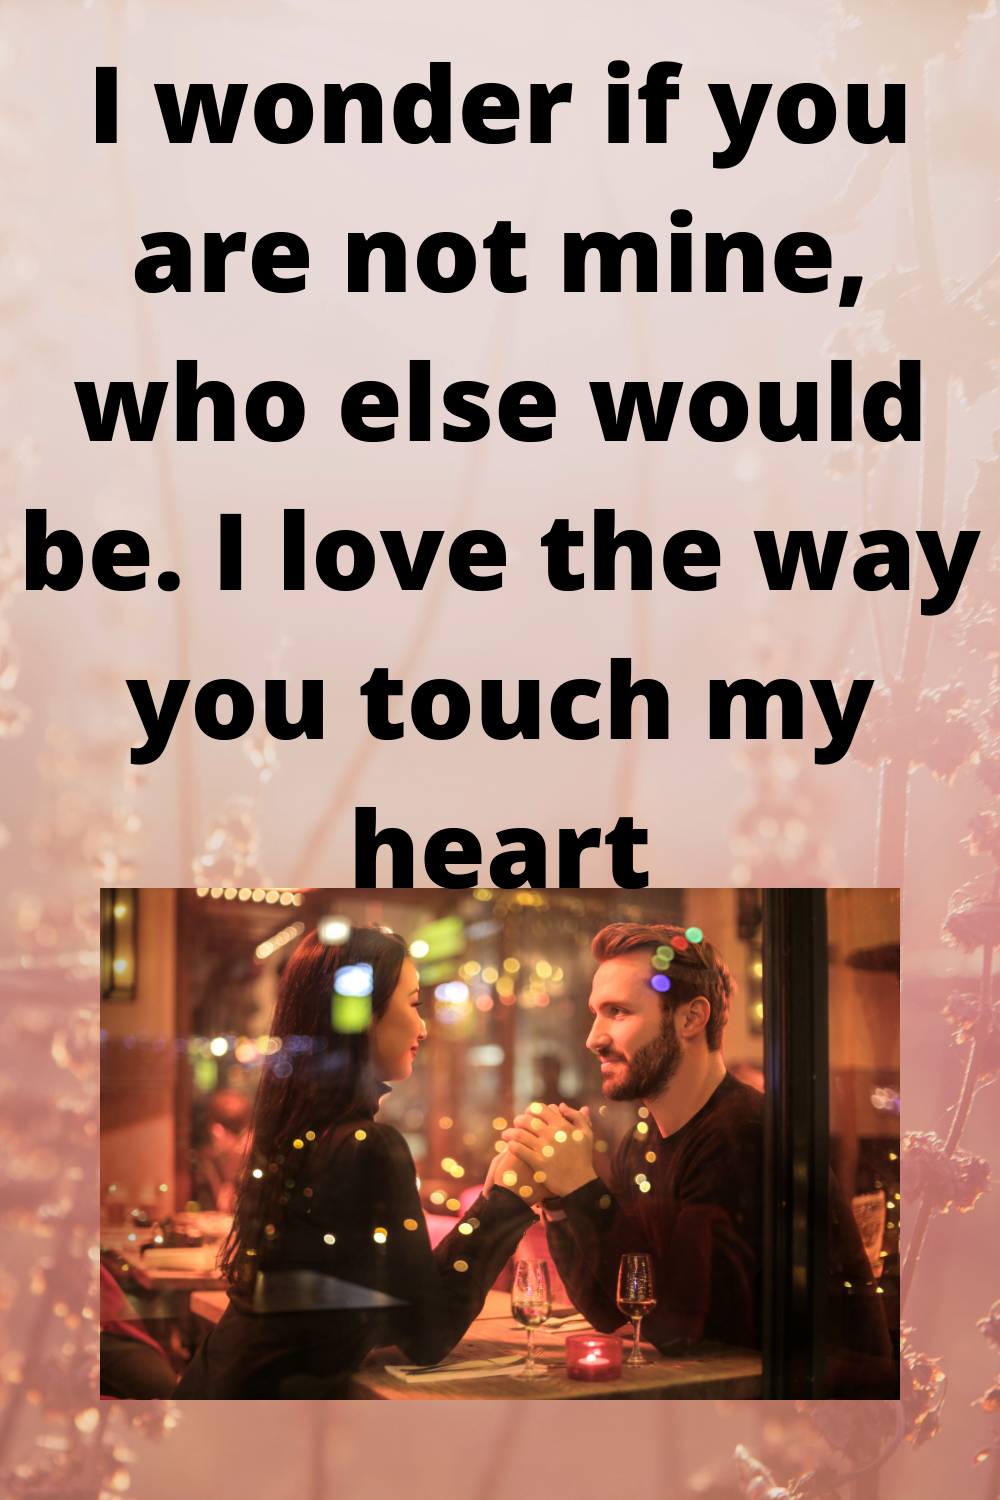 55 Fantastic love quotes for him that will melt his heart